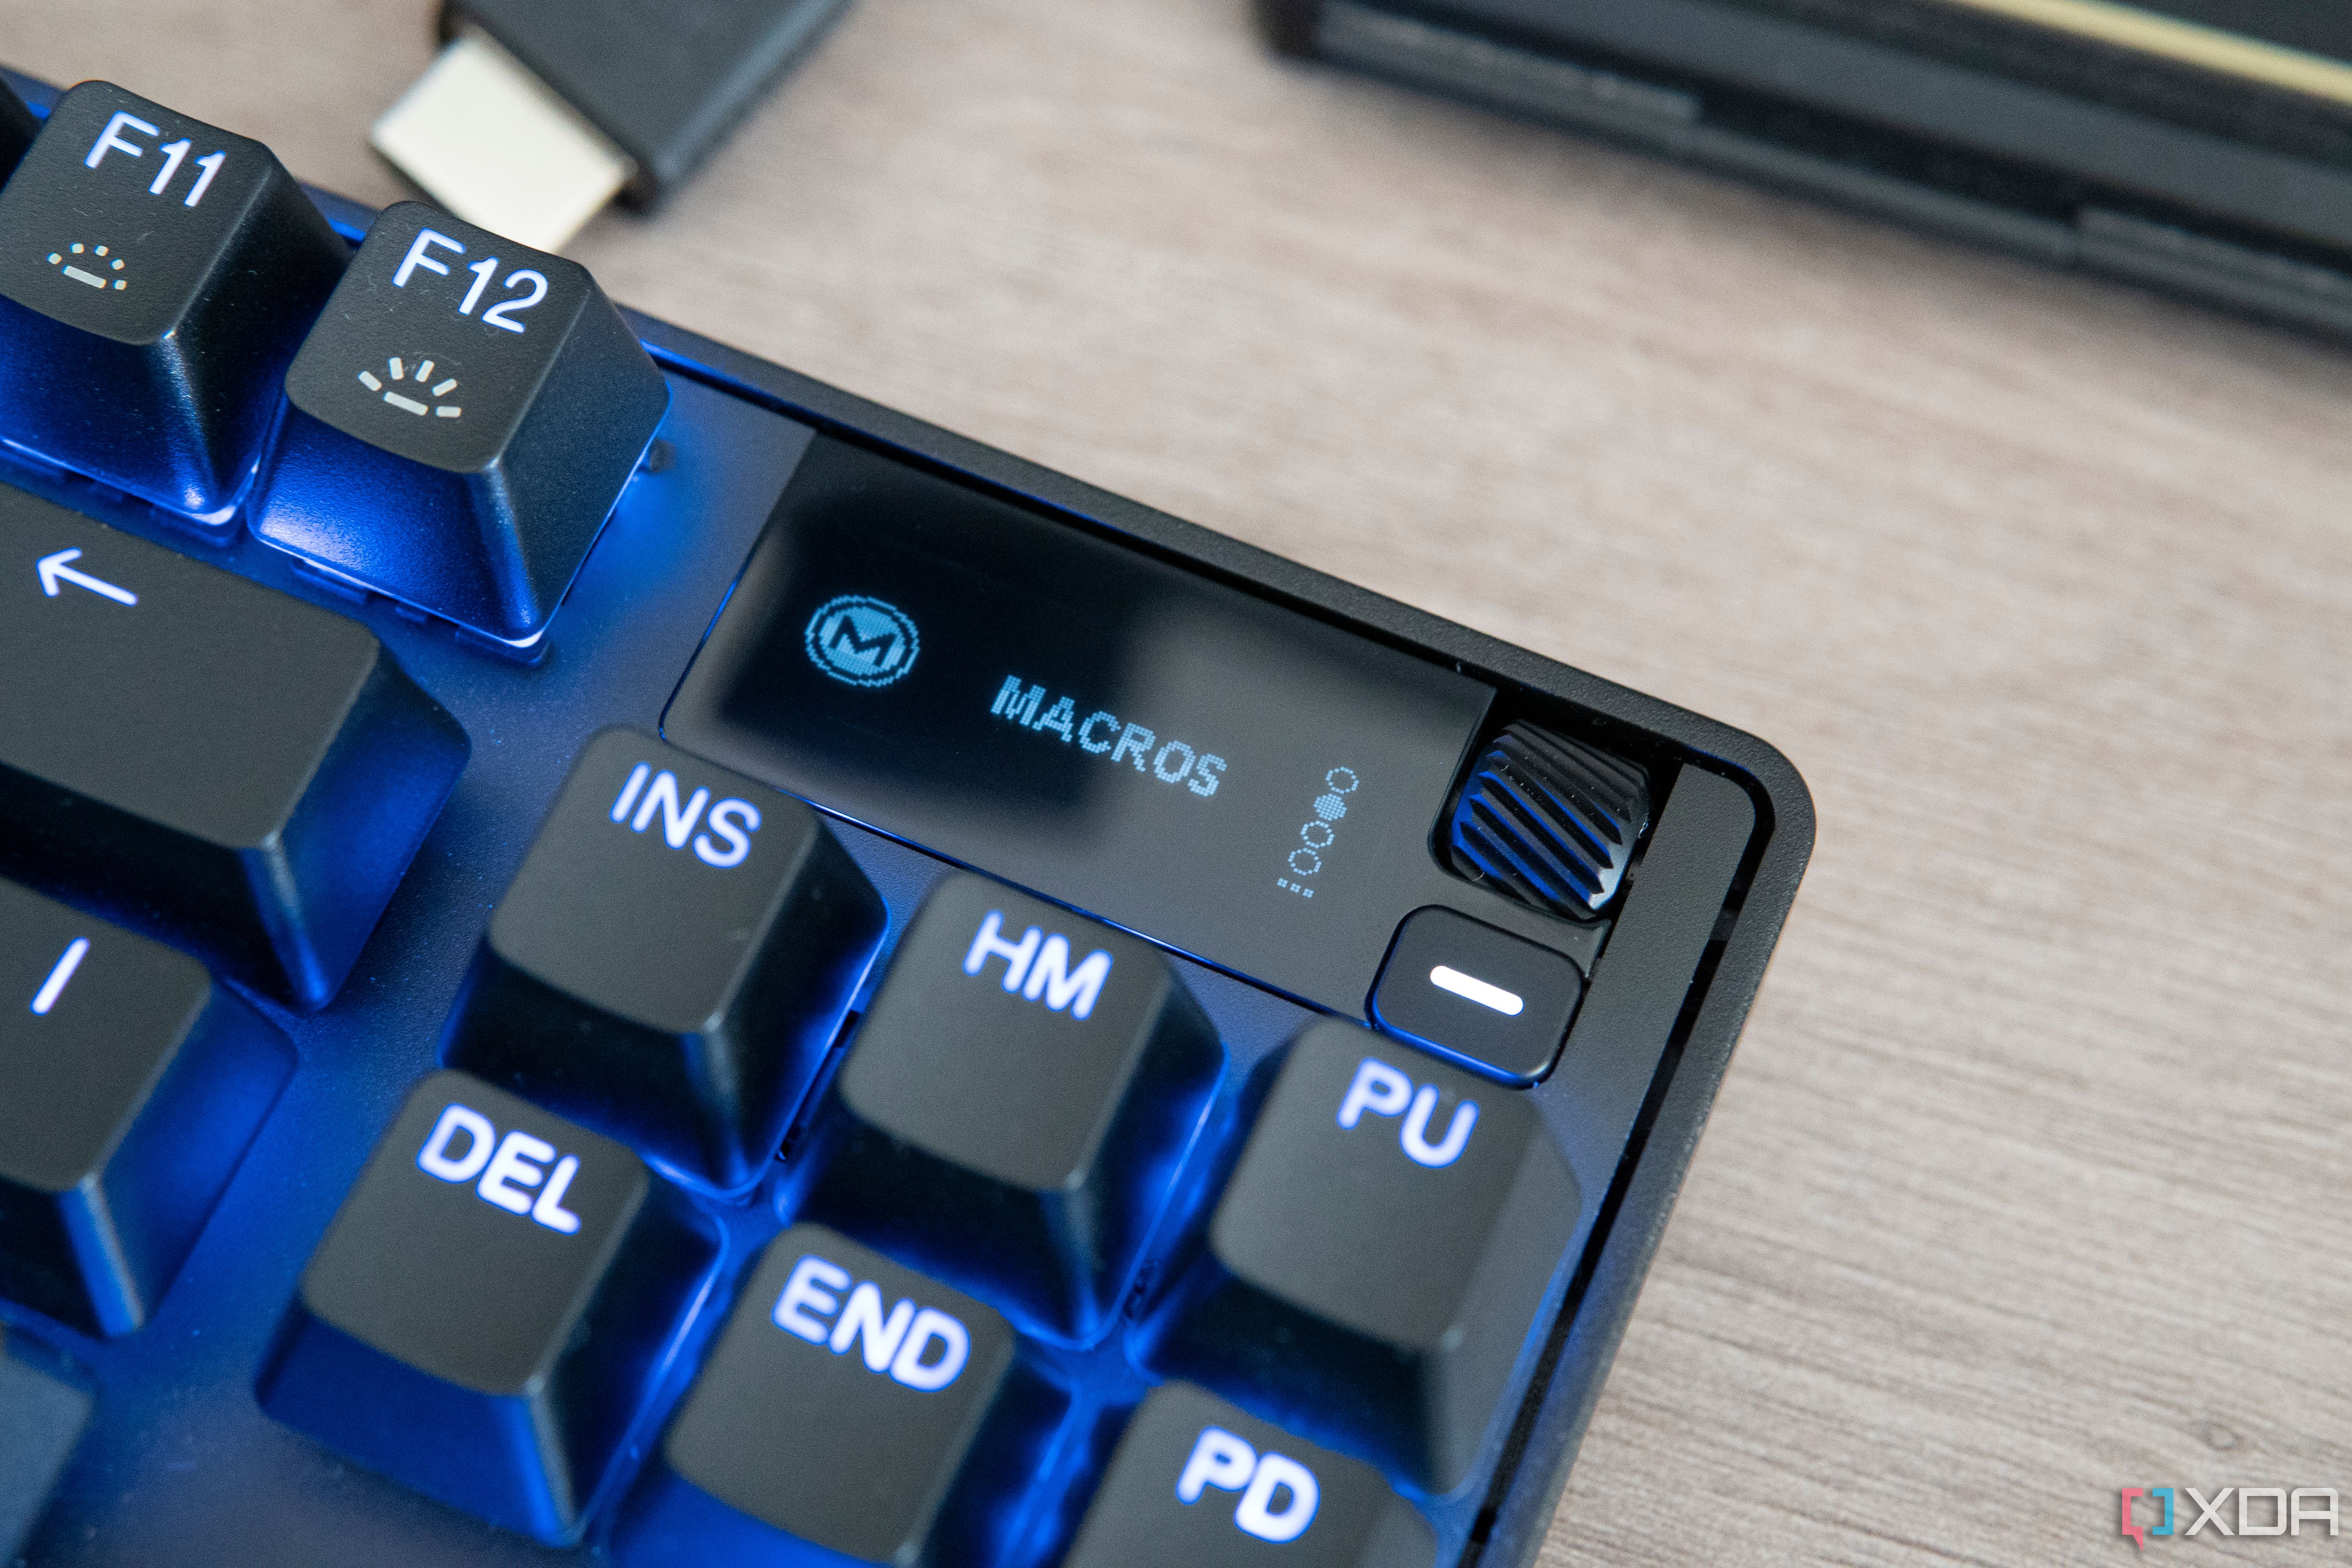 Close-up view of the SteelSeries Apex Pro TKL's OLED display showing the Macros option in the built-in menu